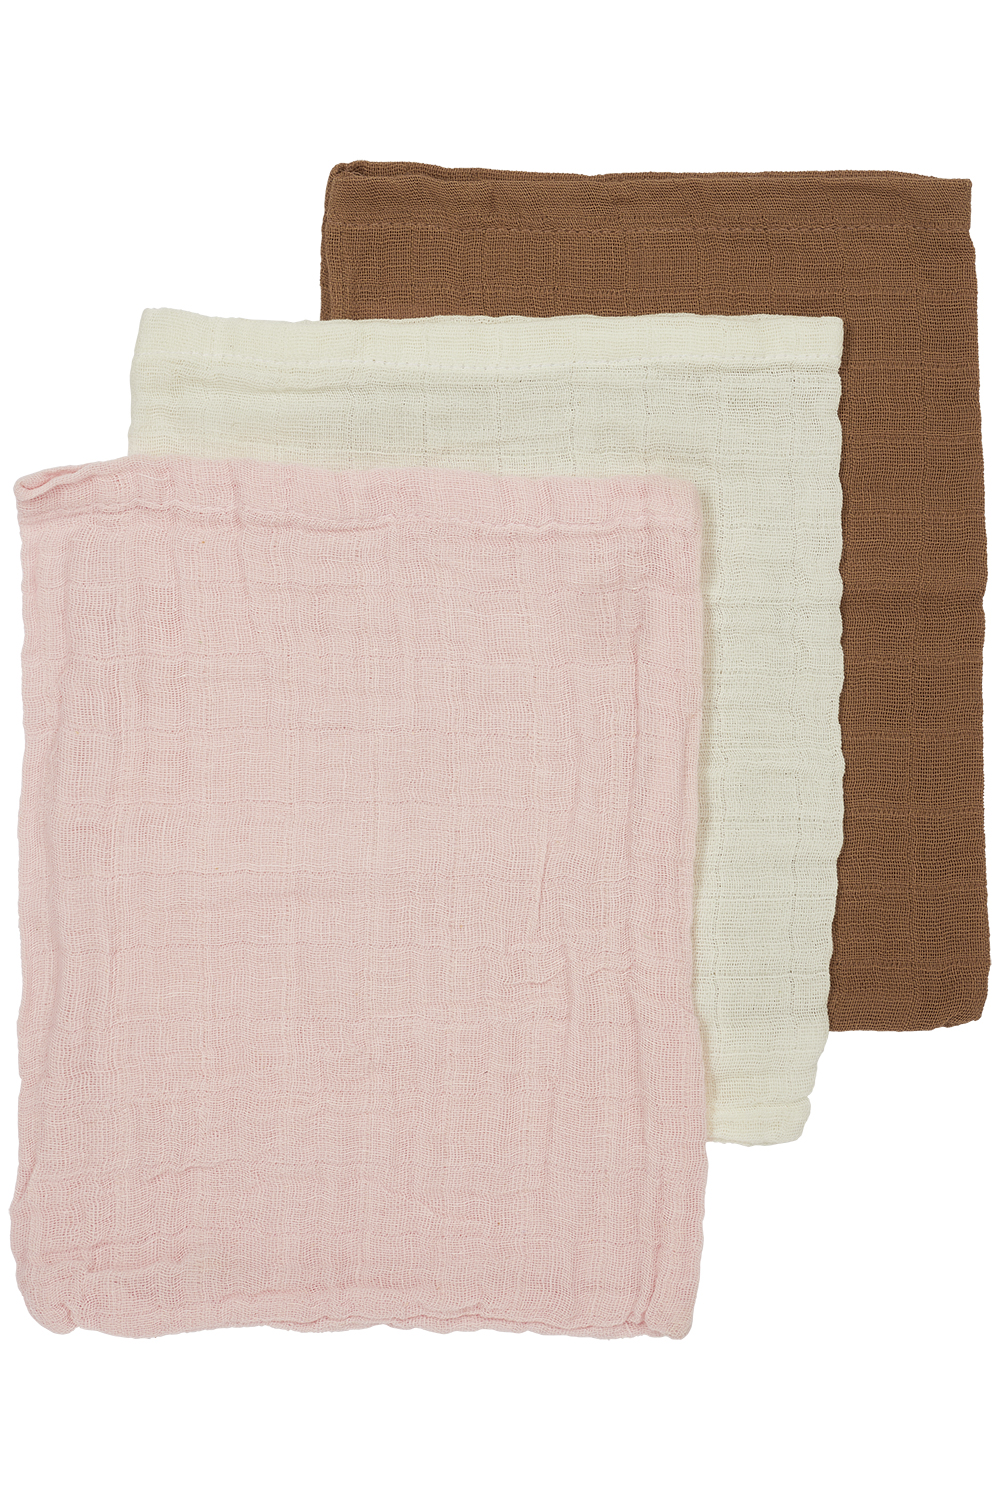 Washcloth 3-pack pre-washed muslin Uni - offwhite/soft pink/toffee - 20x17cm